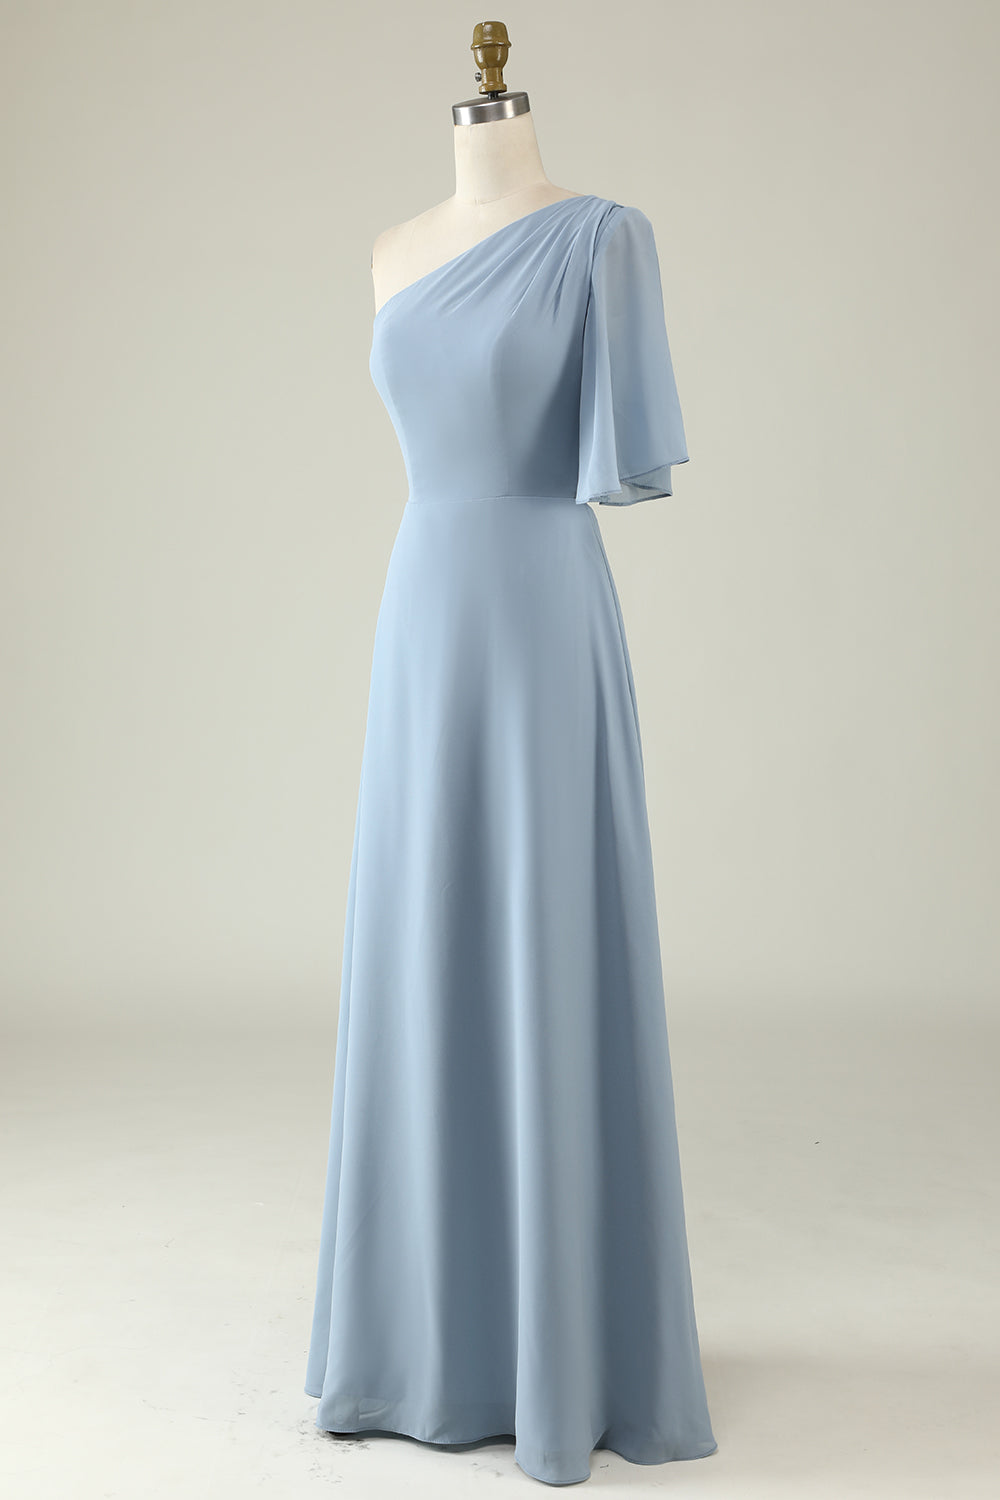 One Shoulder Long Chiffon Bridesmaid Dress With Bowtie